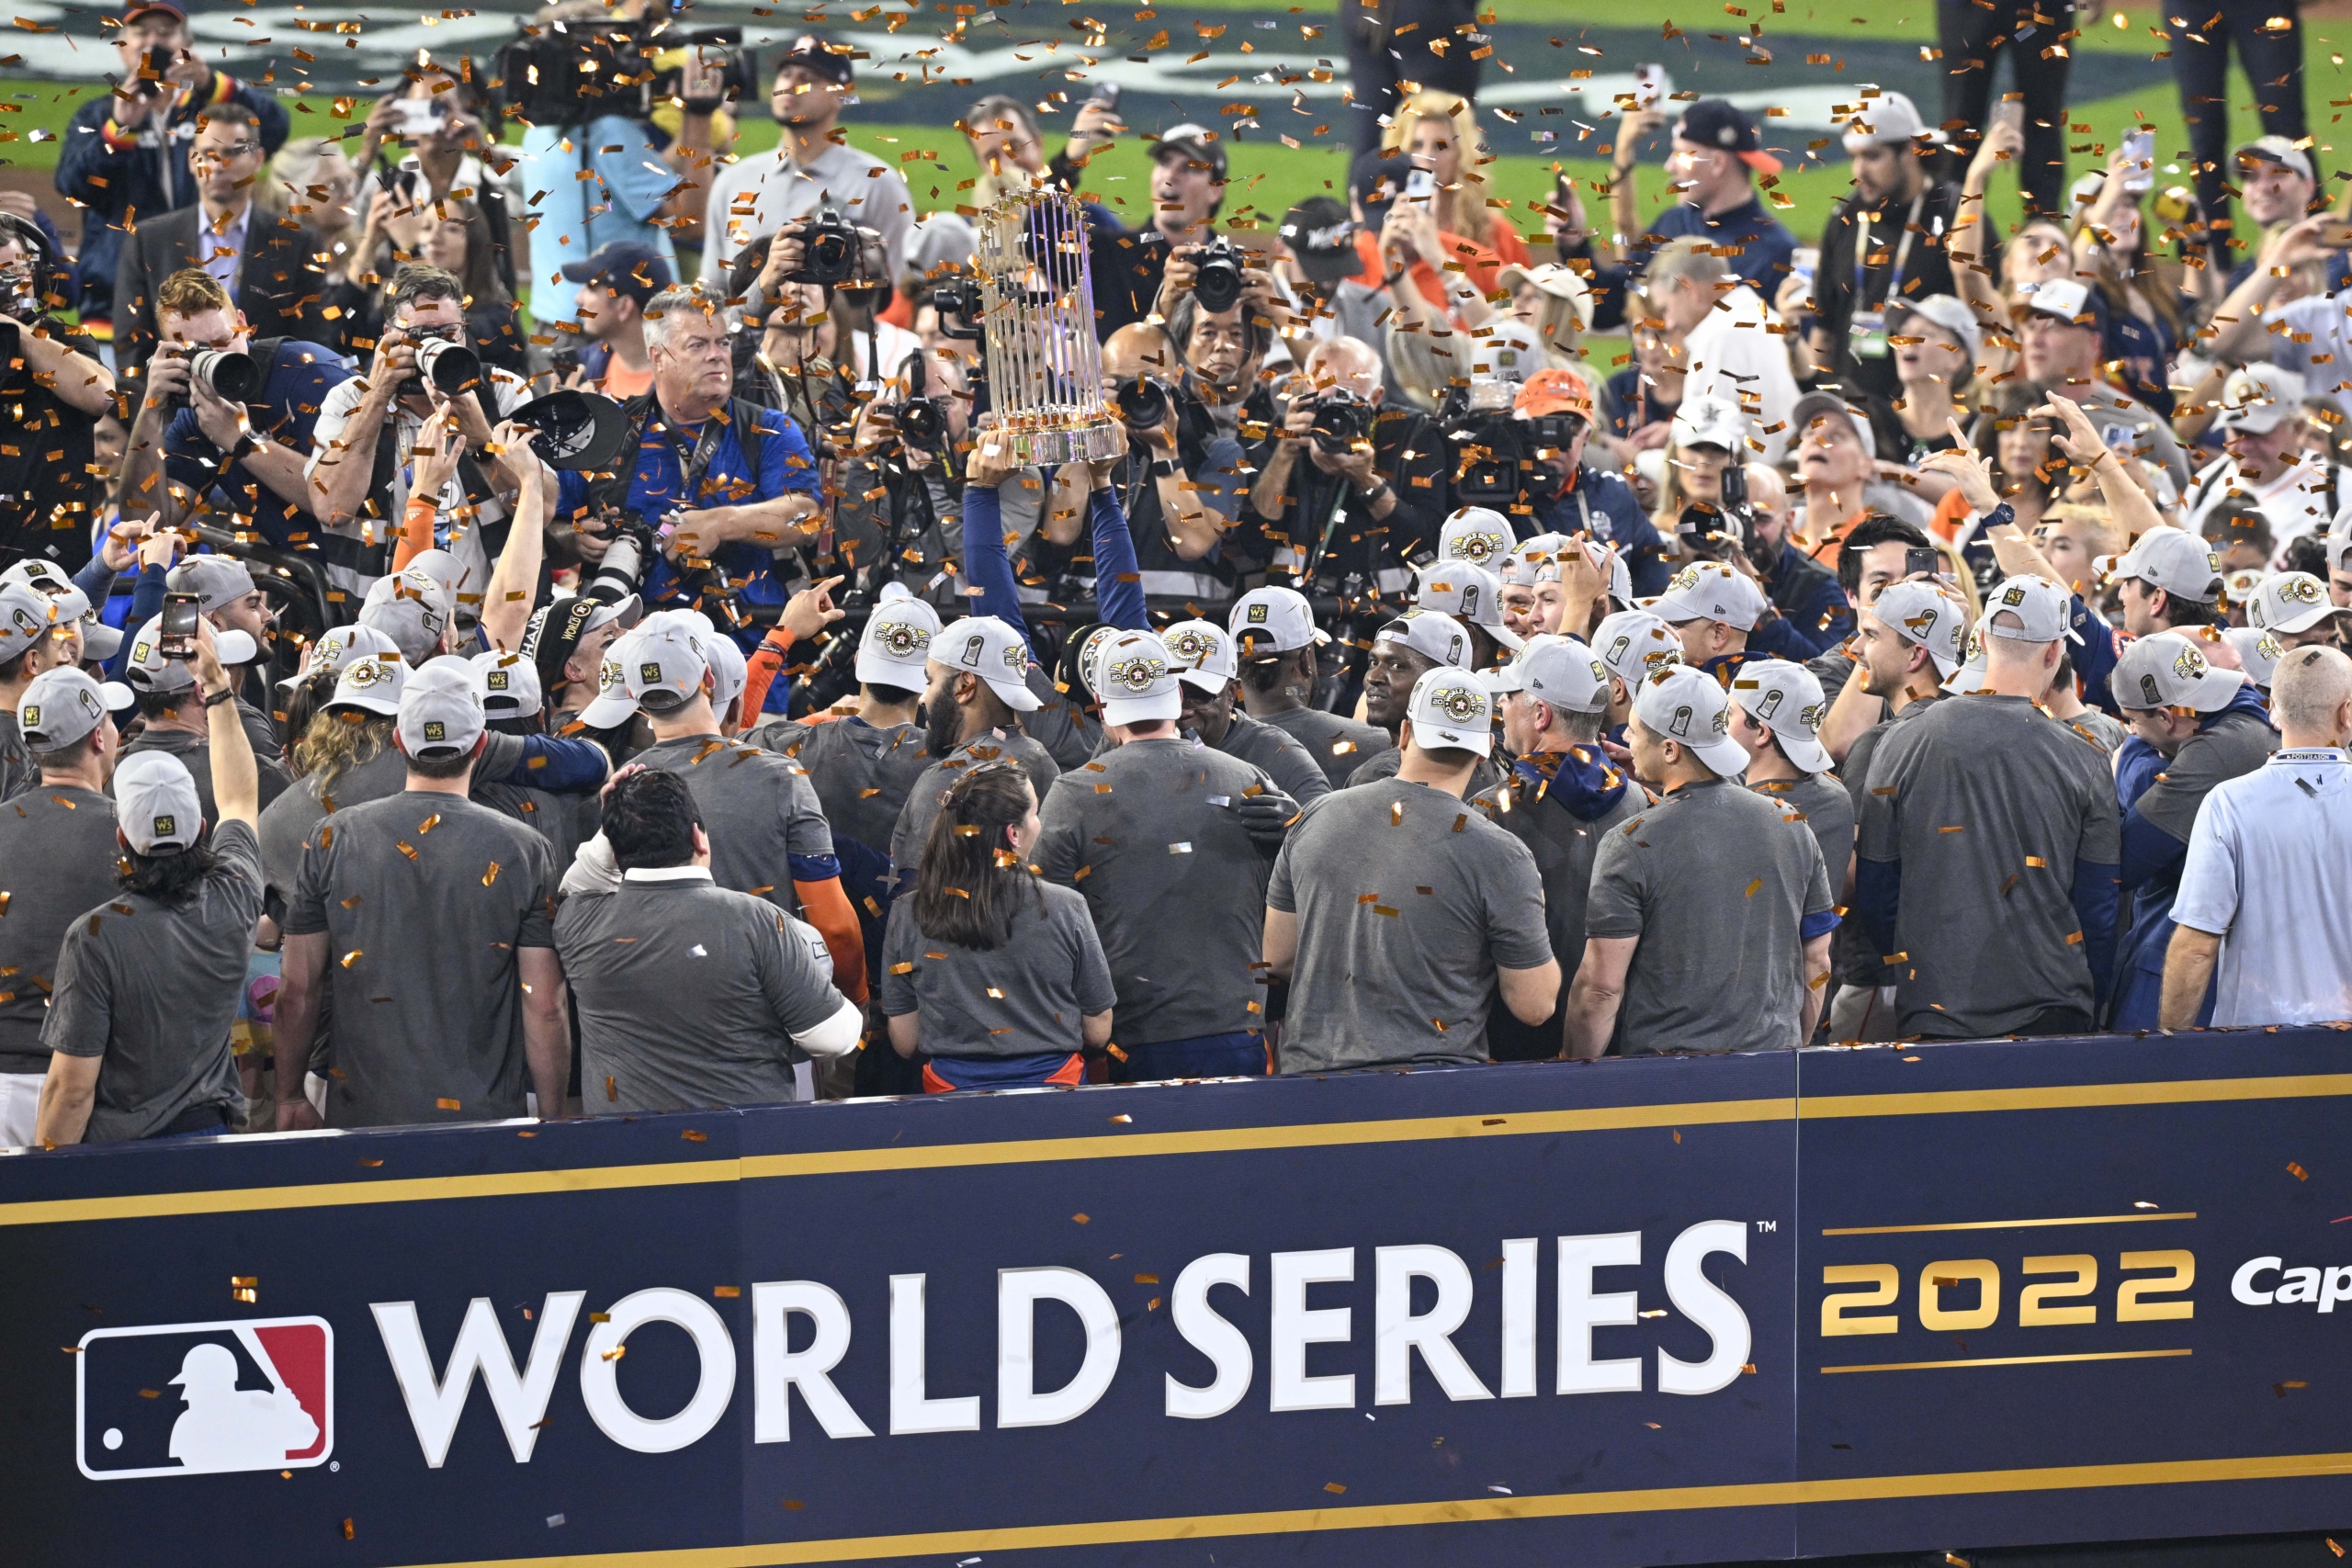 MLB Standings: Houston Astros secure 2022 World Series title